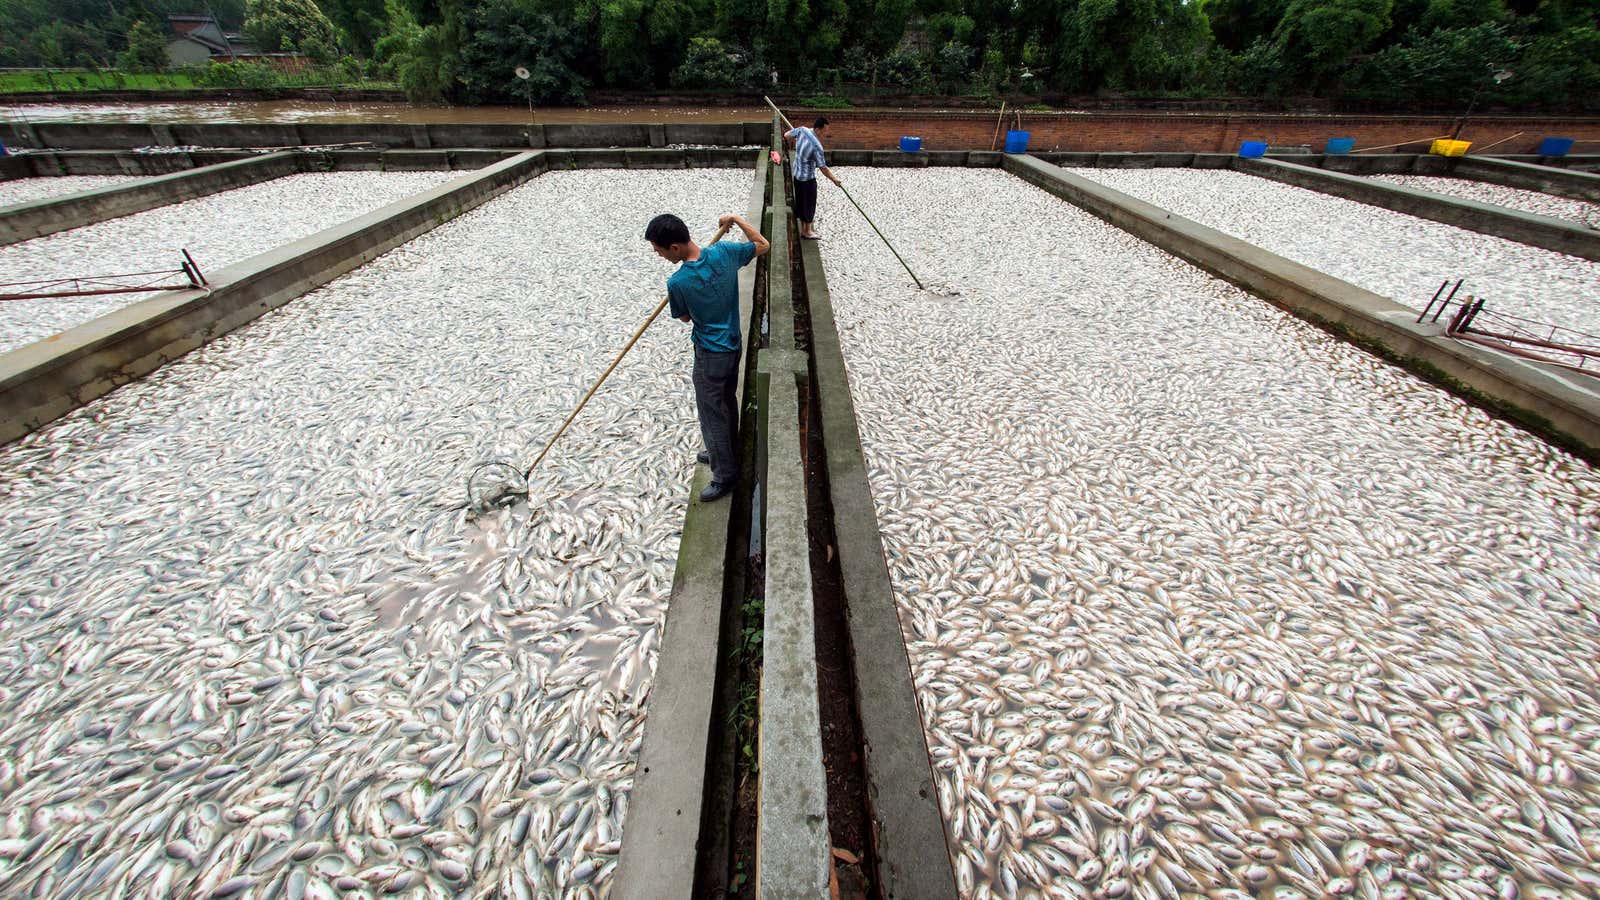 The US says China’s fish farmers are benefitting from illegal trade subsidies.